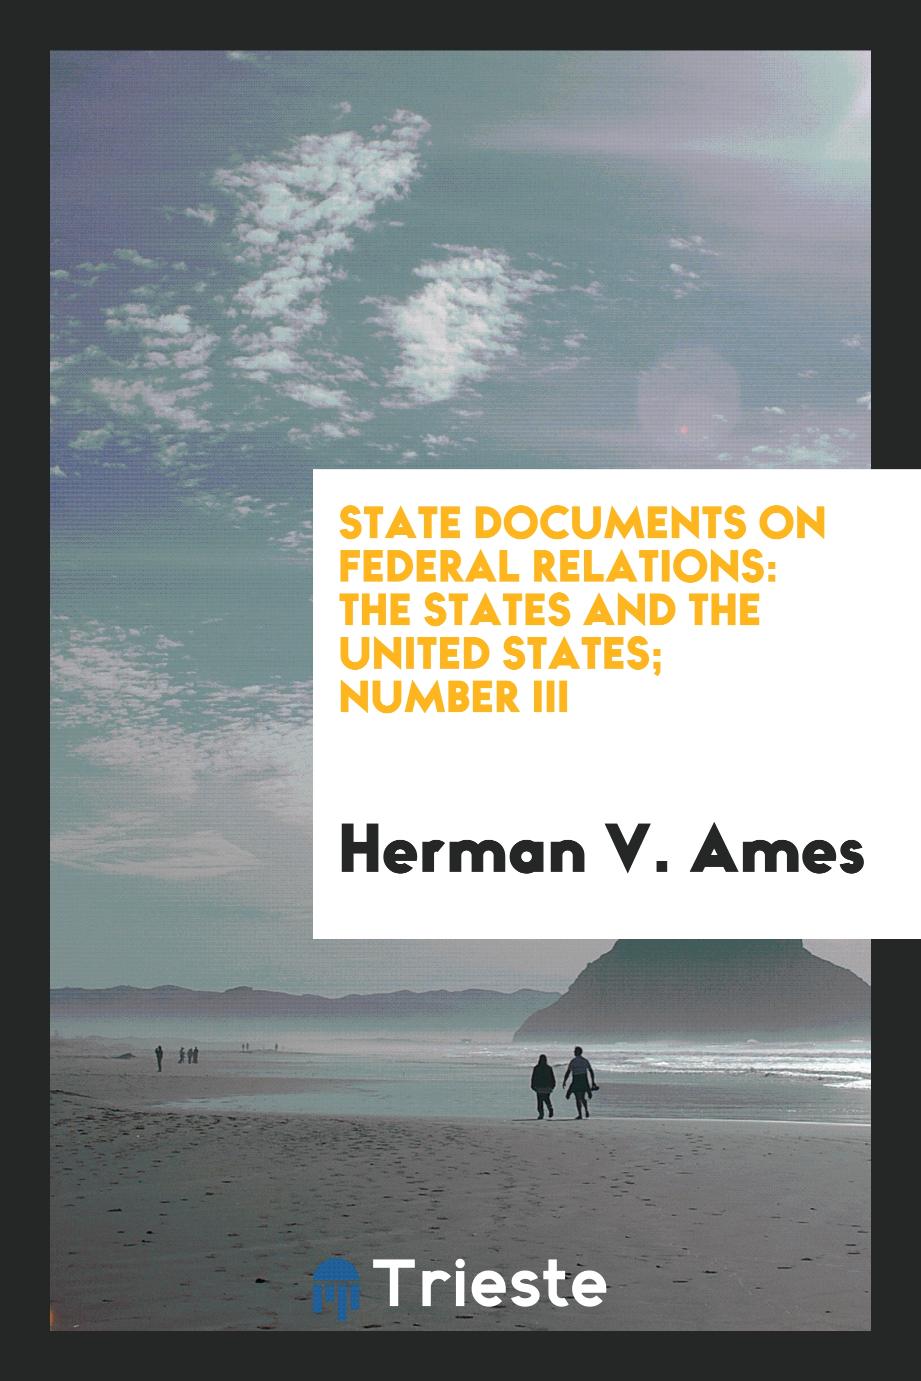 Herman V. Ames - State documents on Federal relations: the States and the United States; Number III